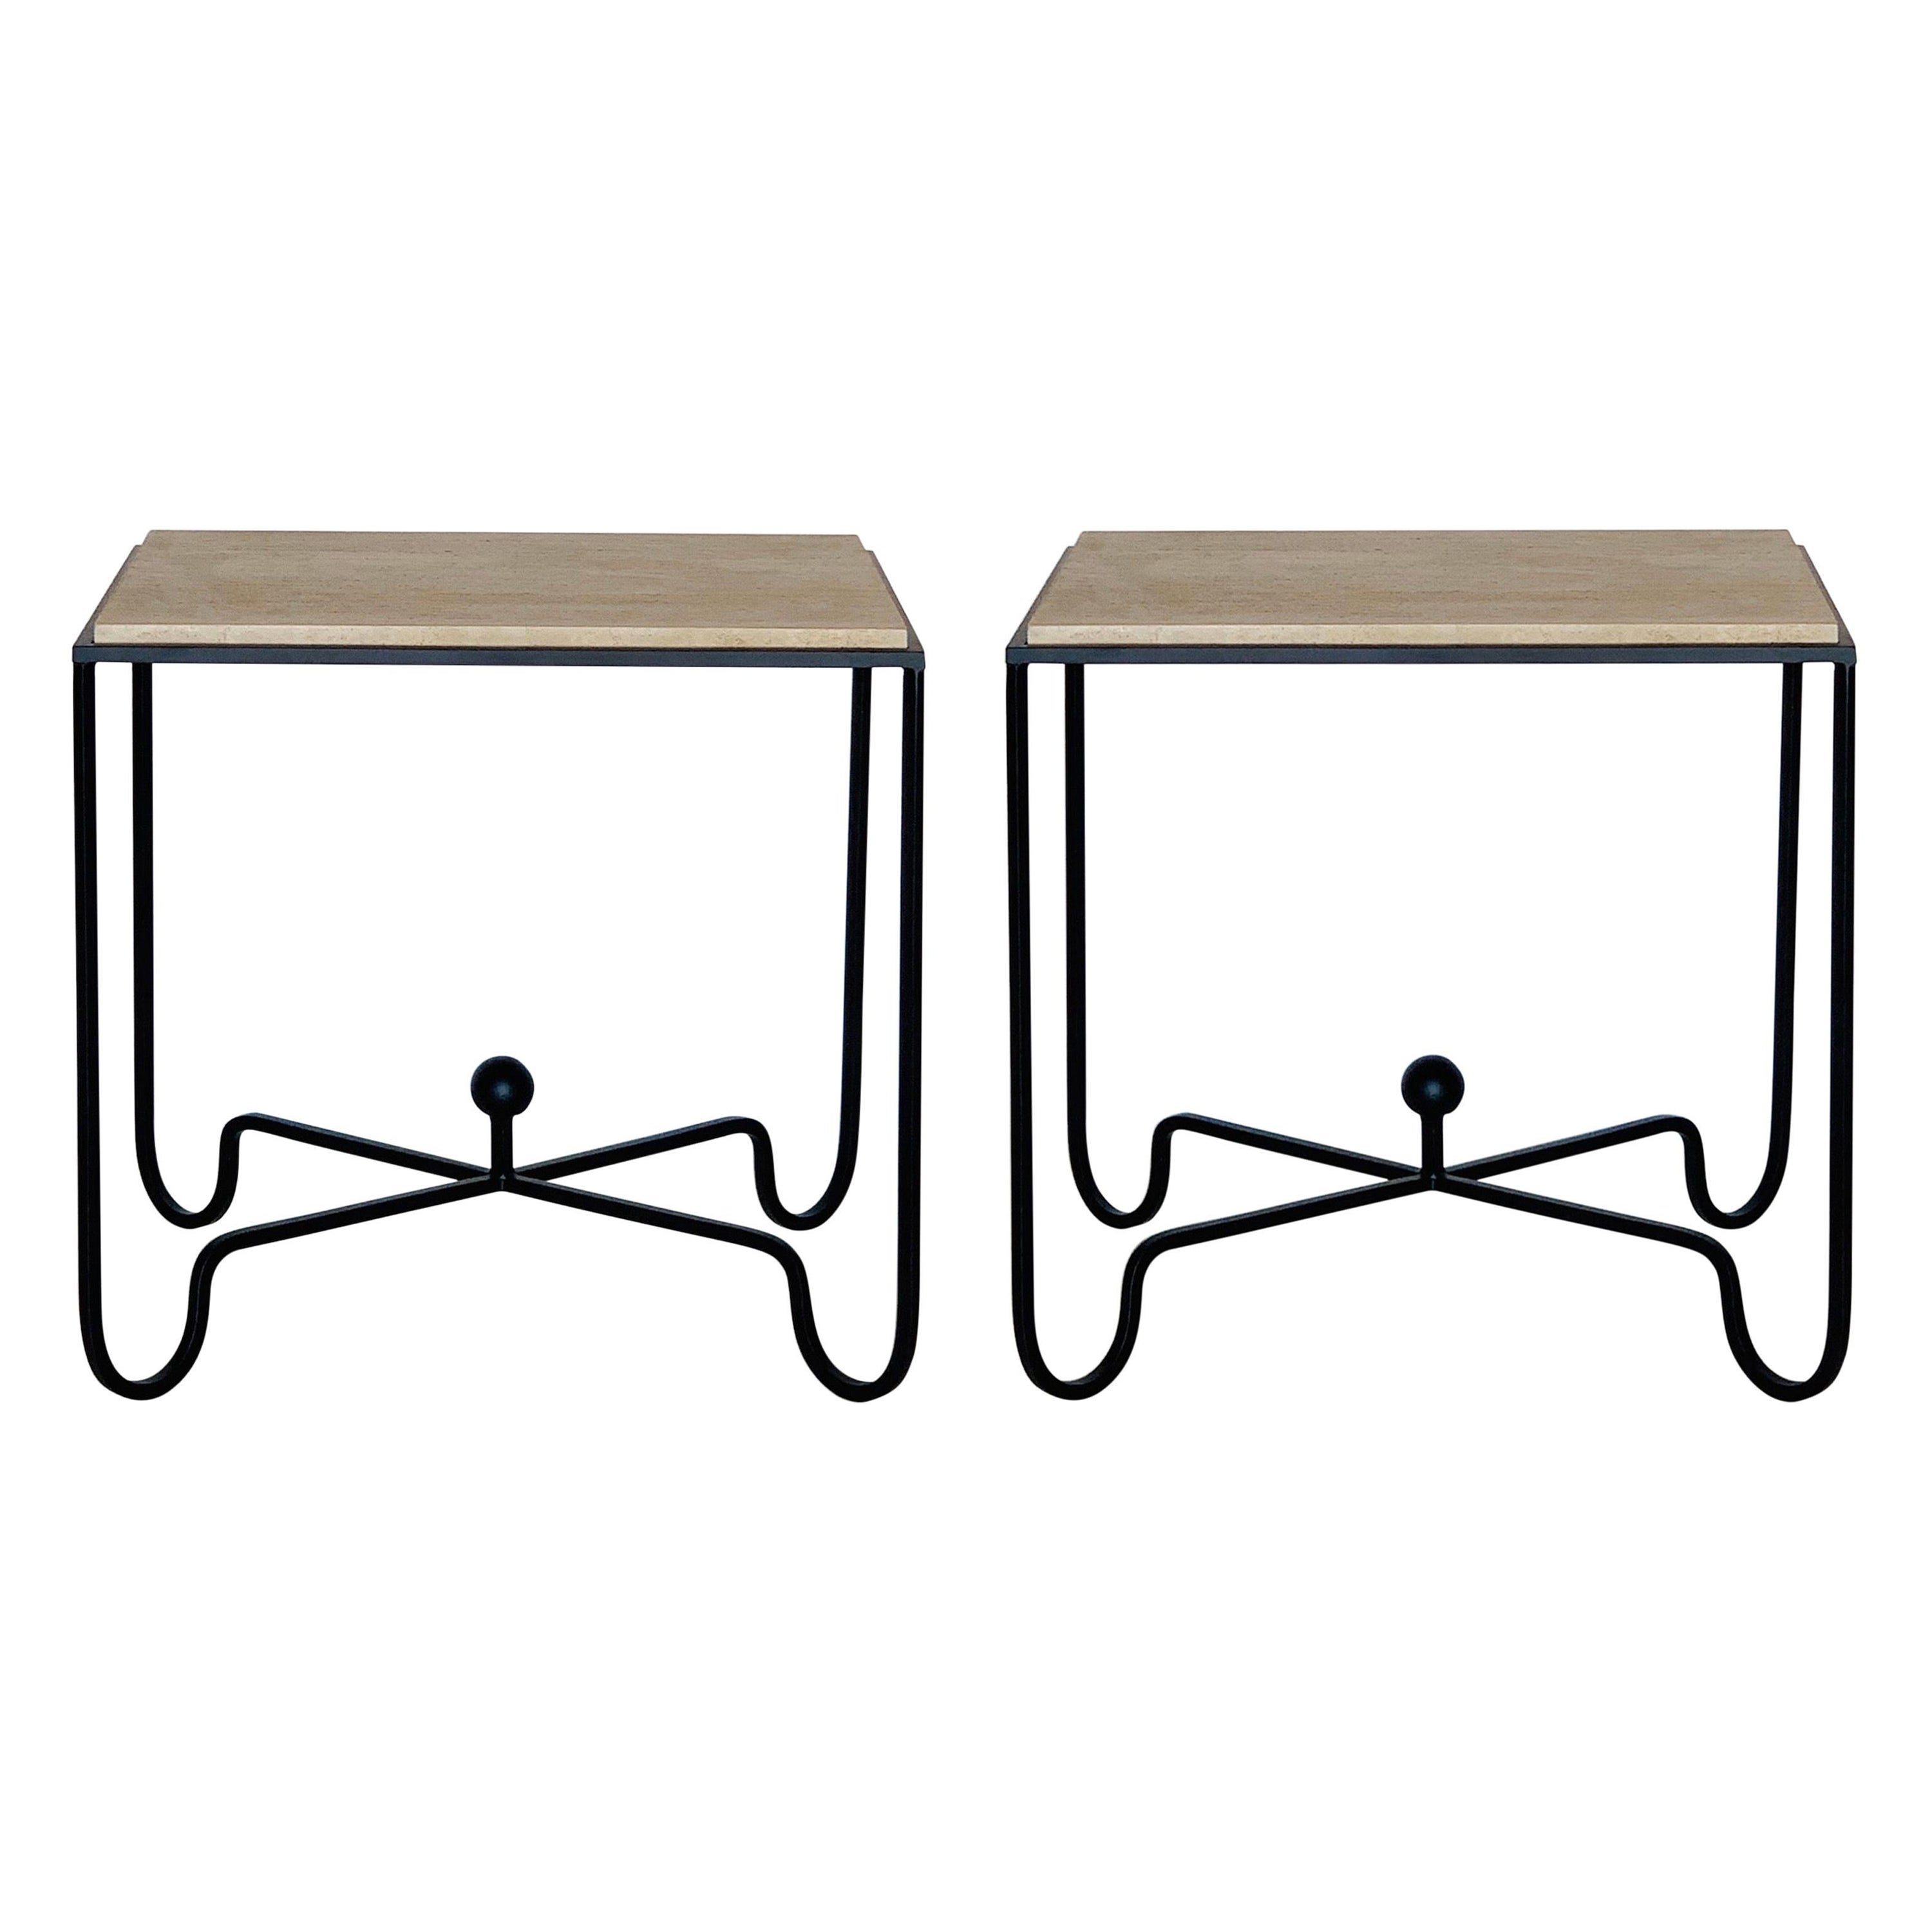 Pair of Large ‘Entretoise’ Travertine Side Tables / Nightstands by Design Frères